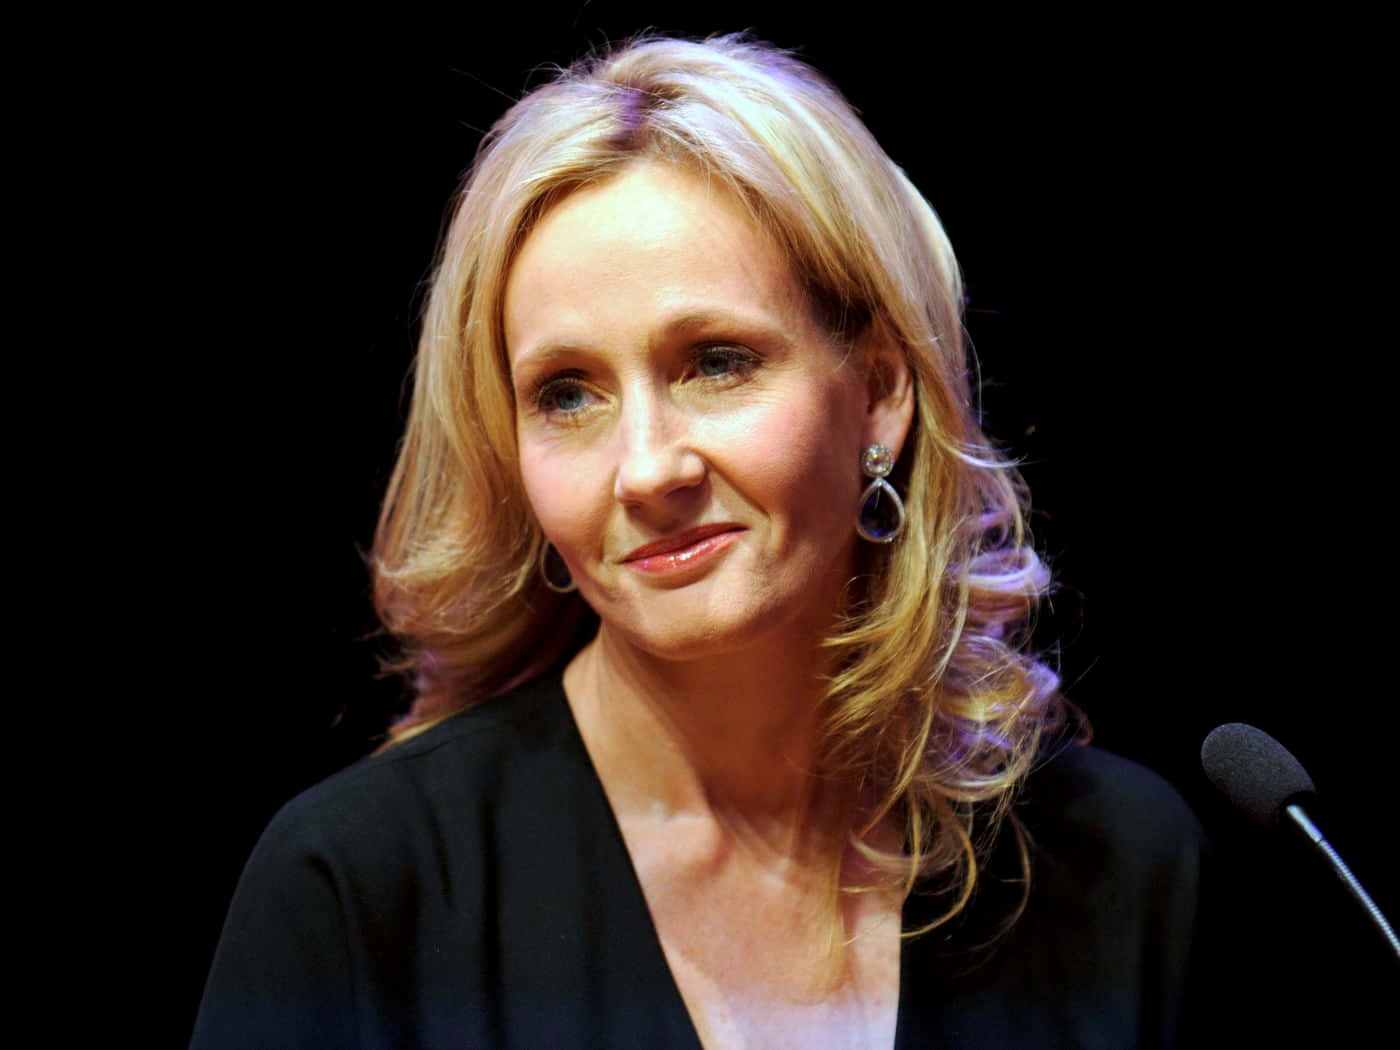 J.K. Rowling at a book signing event Wallpaper